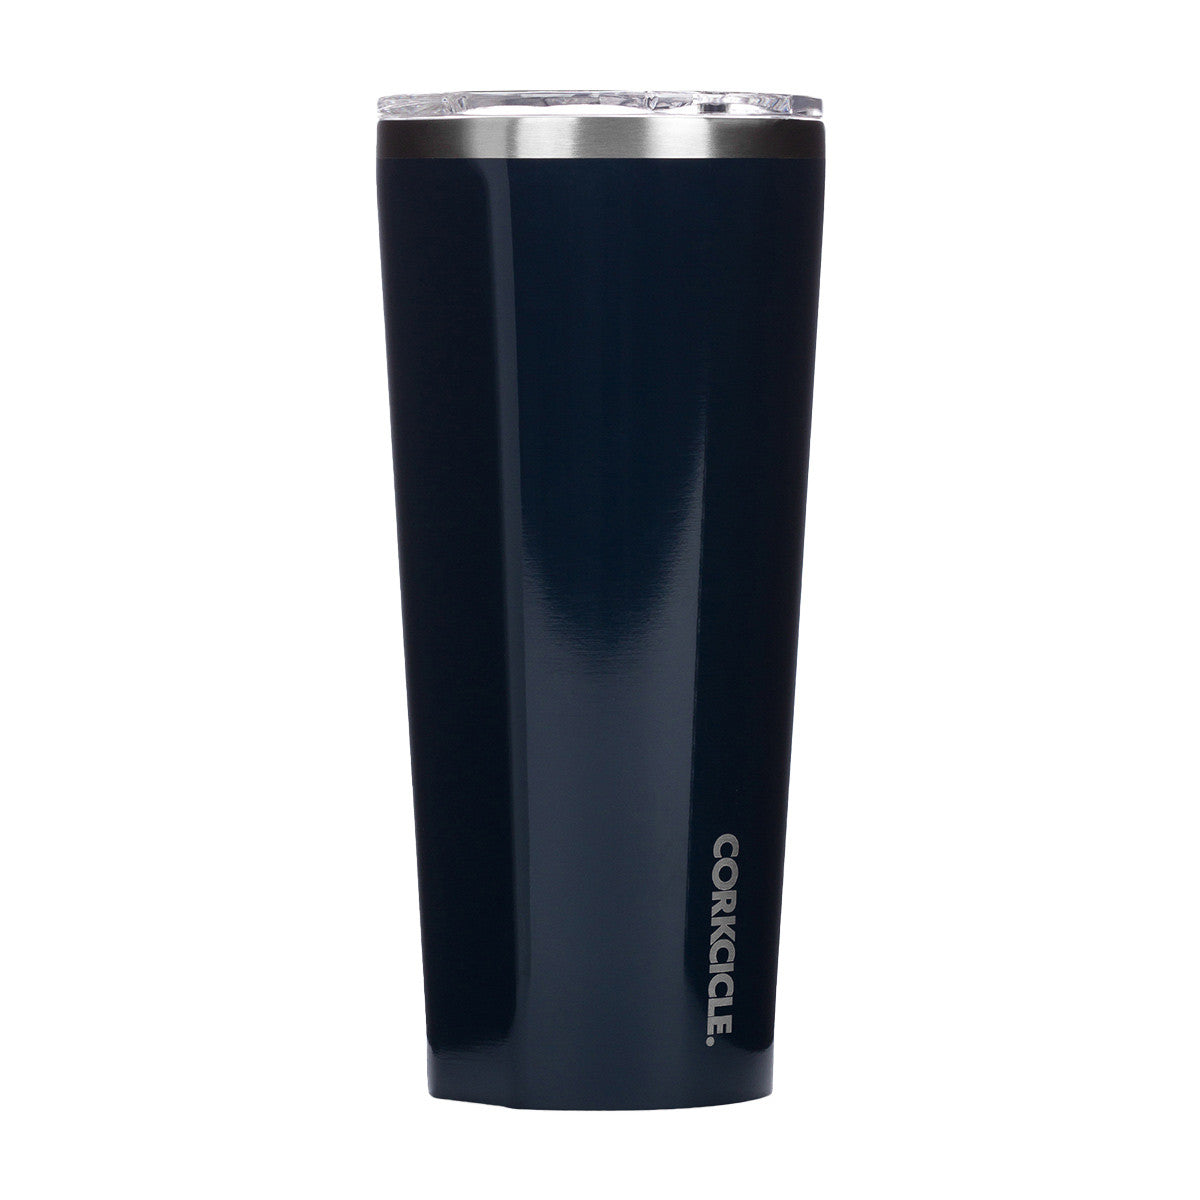 Corkcicle Corkcicle 24 oz. Tumbler - Gloss Graphite-The Lamp Stand